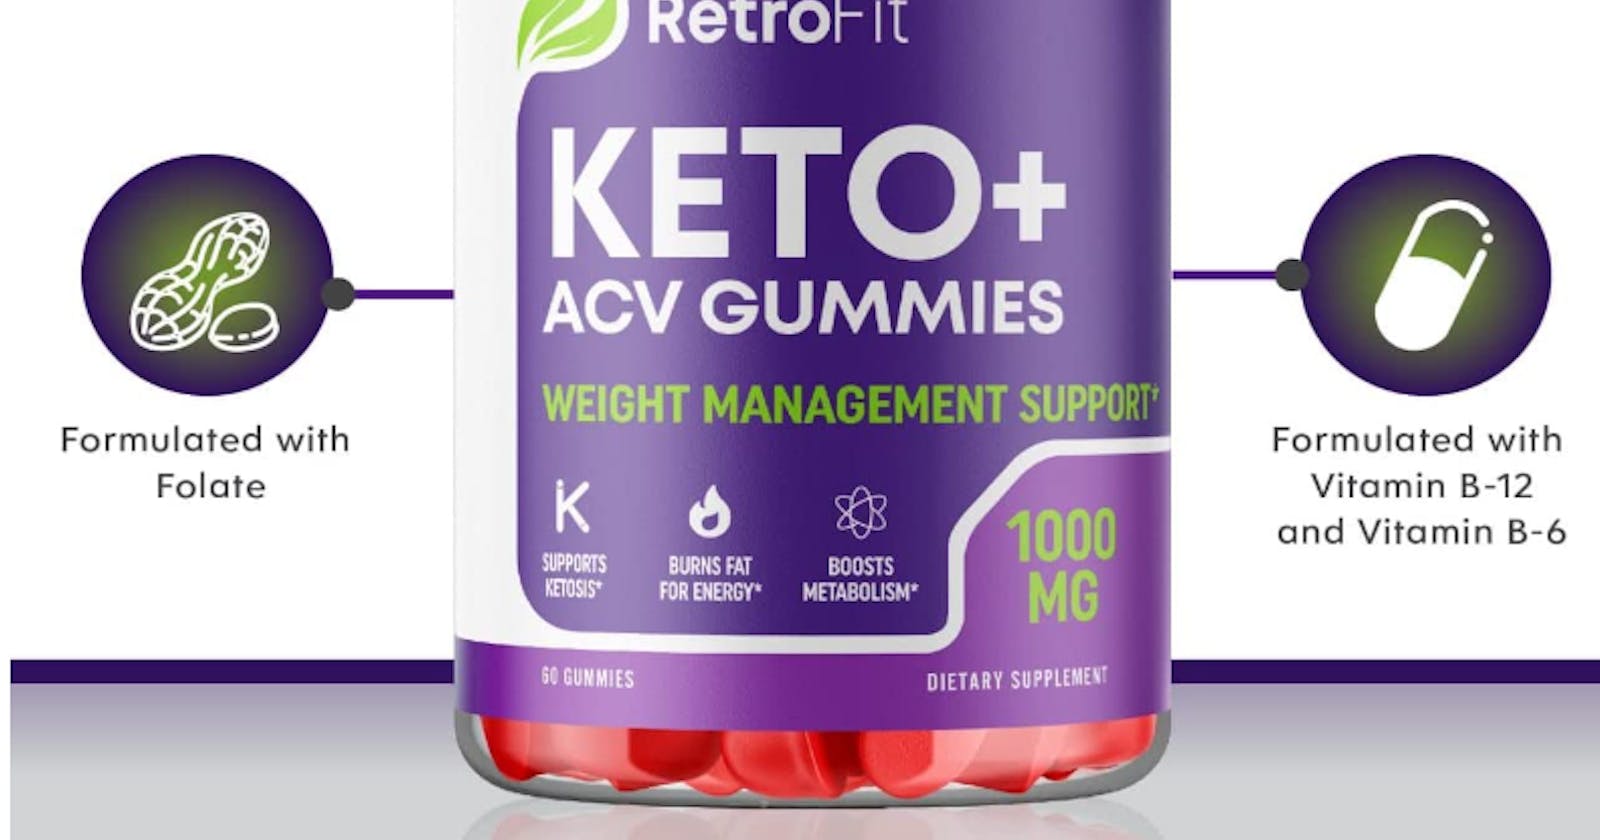 Retrofit Keto ACV Gummies Reviews, Scam, Amazon, Price, Website, Ingredients, Shark Tank For Weight loss?